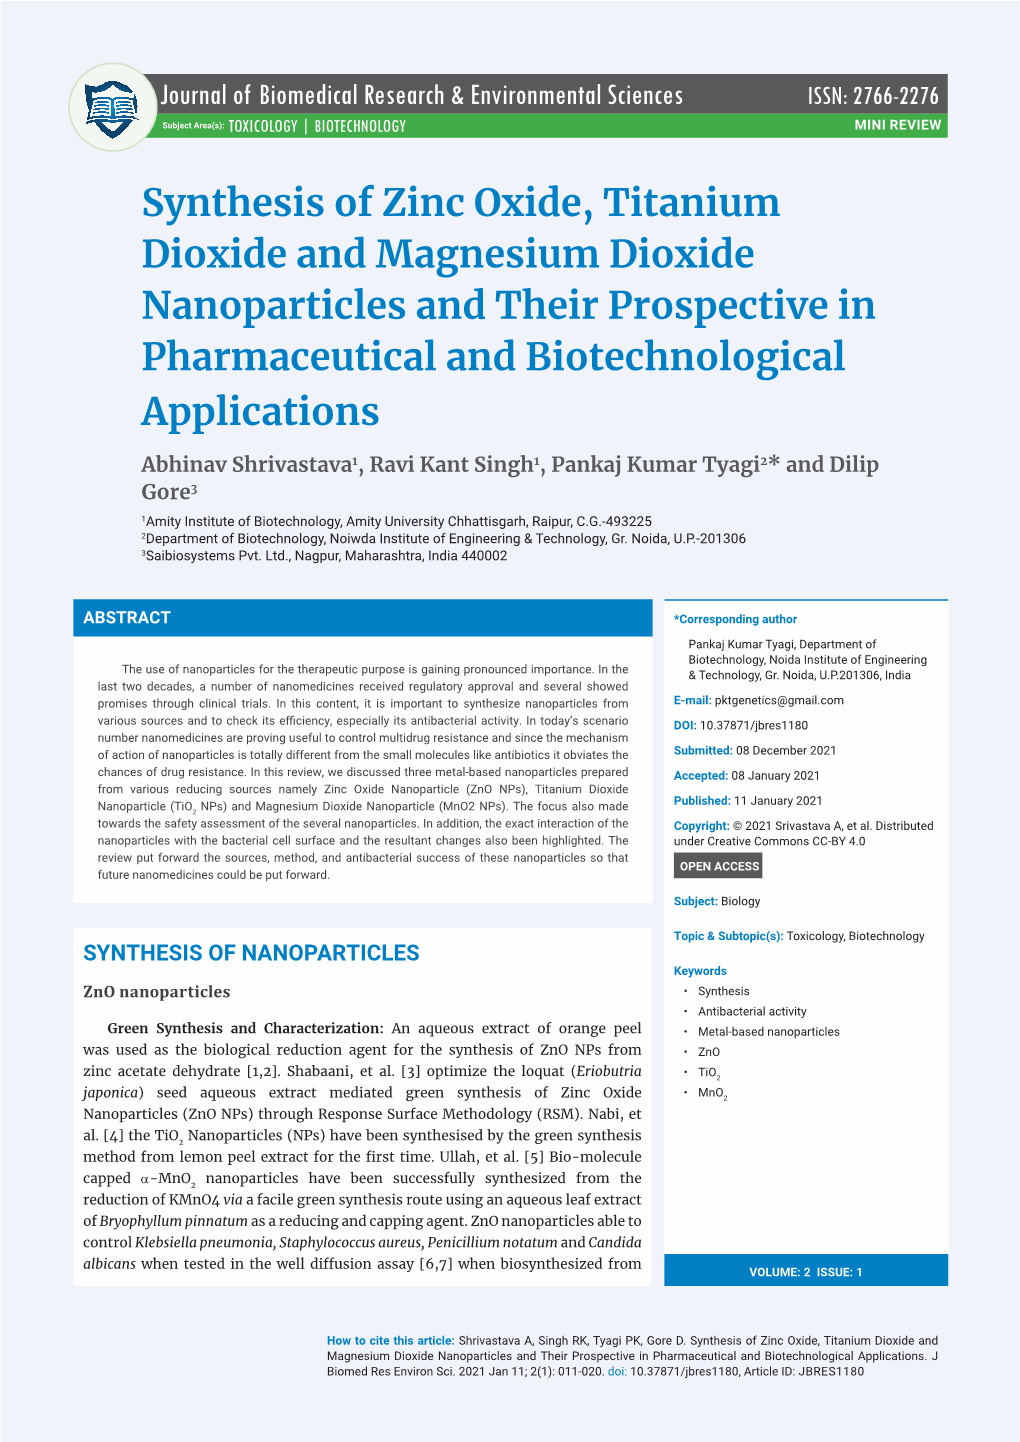 Synthesis of Zinc Oxide, Titanium Dioxide and Magnesium Dioxide Nanoparticles and Their Prospective in Pharmaceutical and Biotechnological Applications